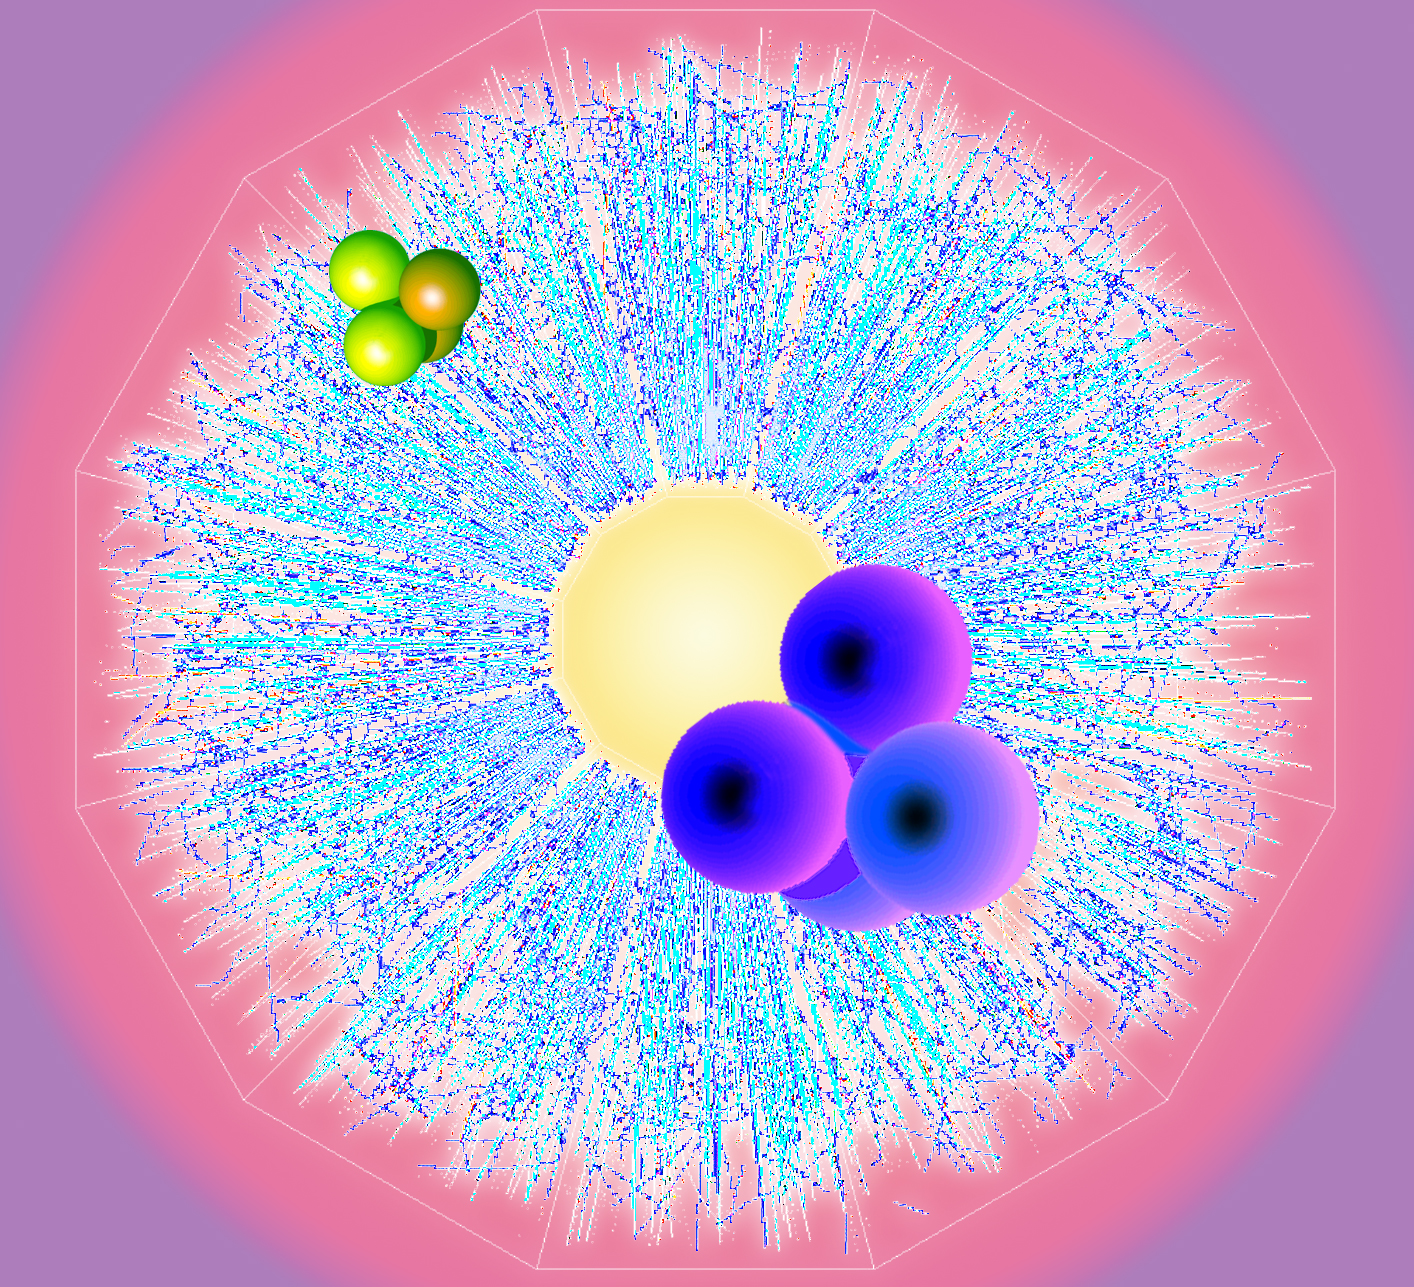 Roughly equal amounts of matter and antimatter are created in the collision of energetic gold nuclei, but because the fireball expands and cools quickly, antimatter can survive longer than that created in the big bang. In this collision an ordinary helium-4 nucleus (background) is matched by a nucleus of antihelium-4 (foreground). 